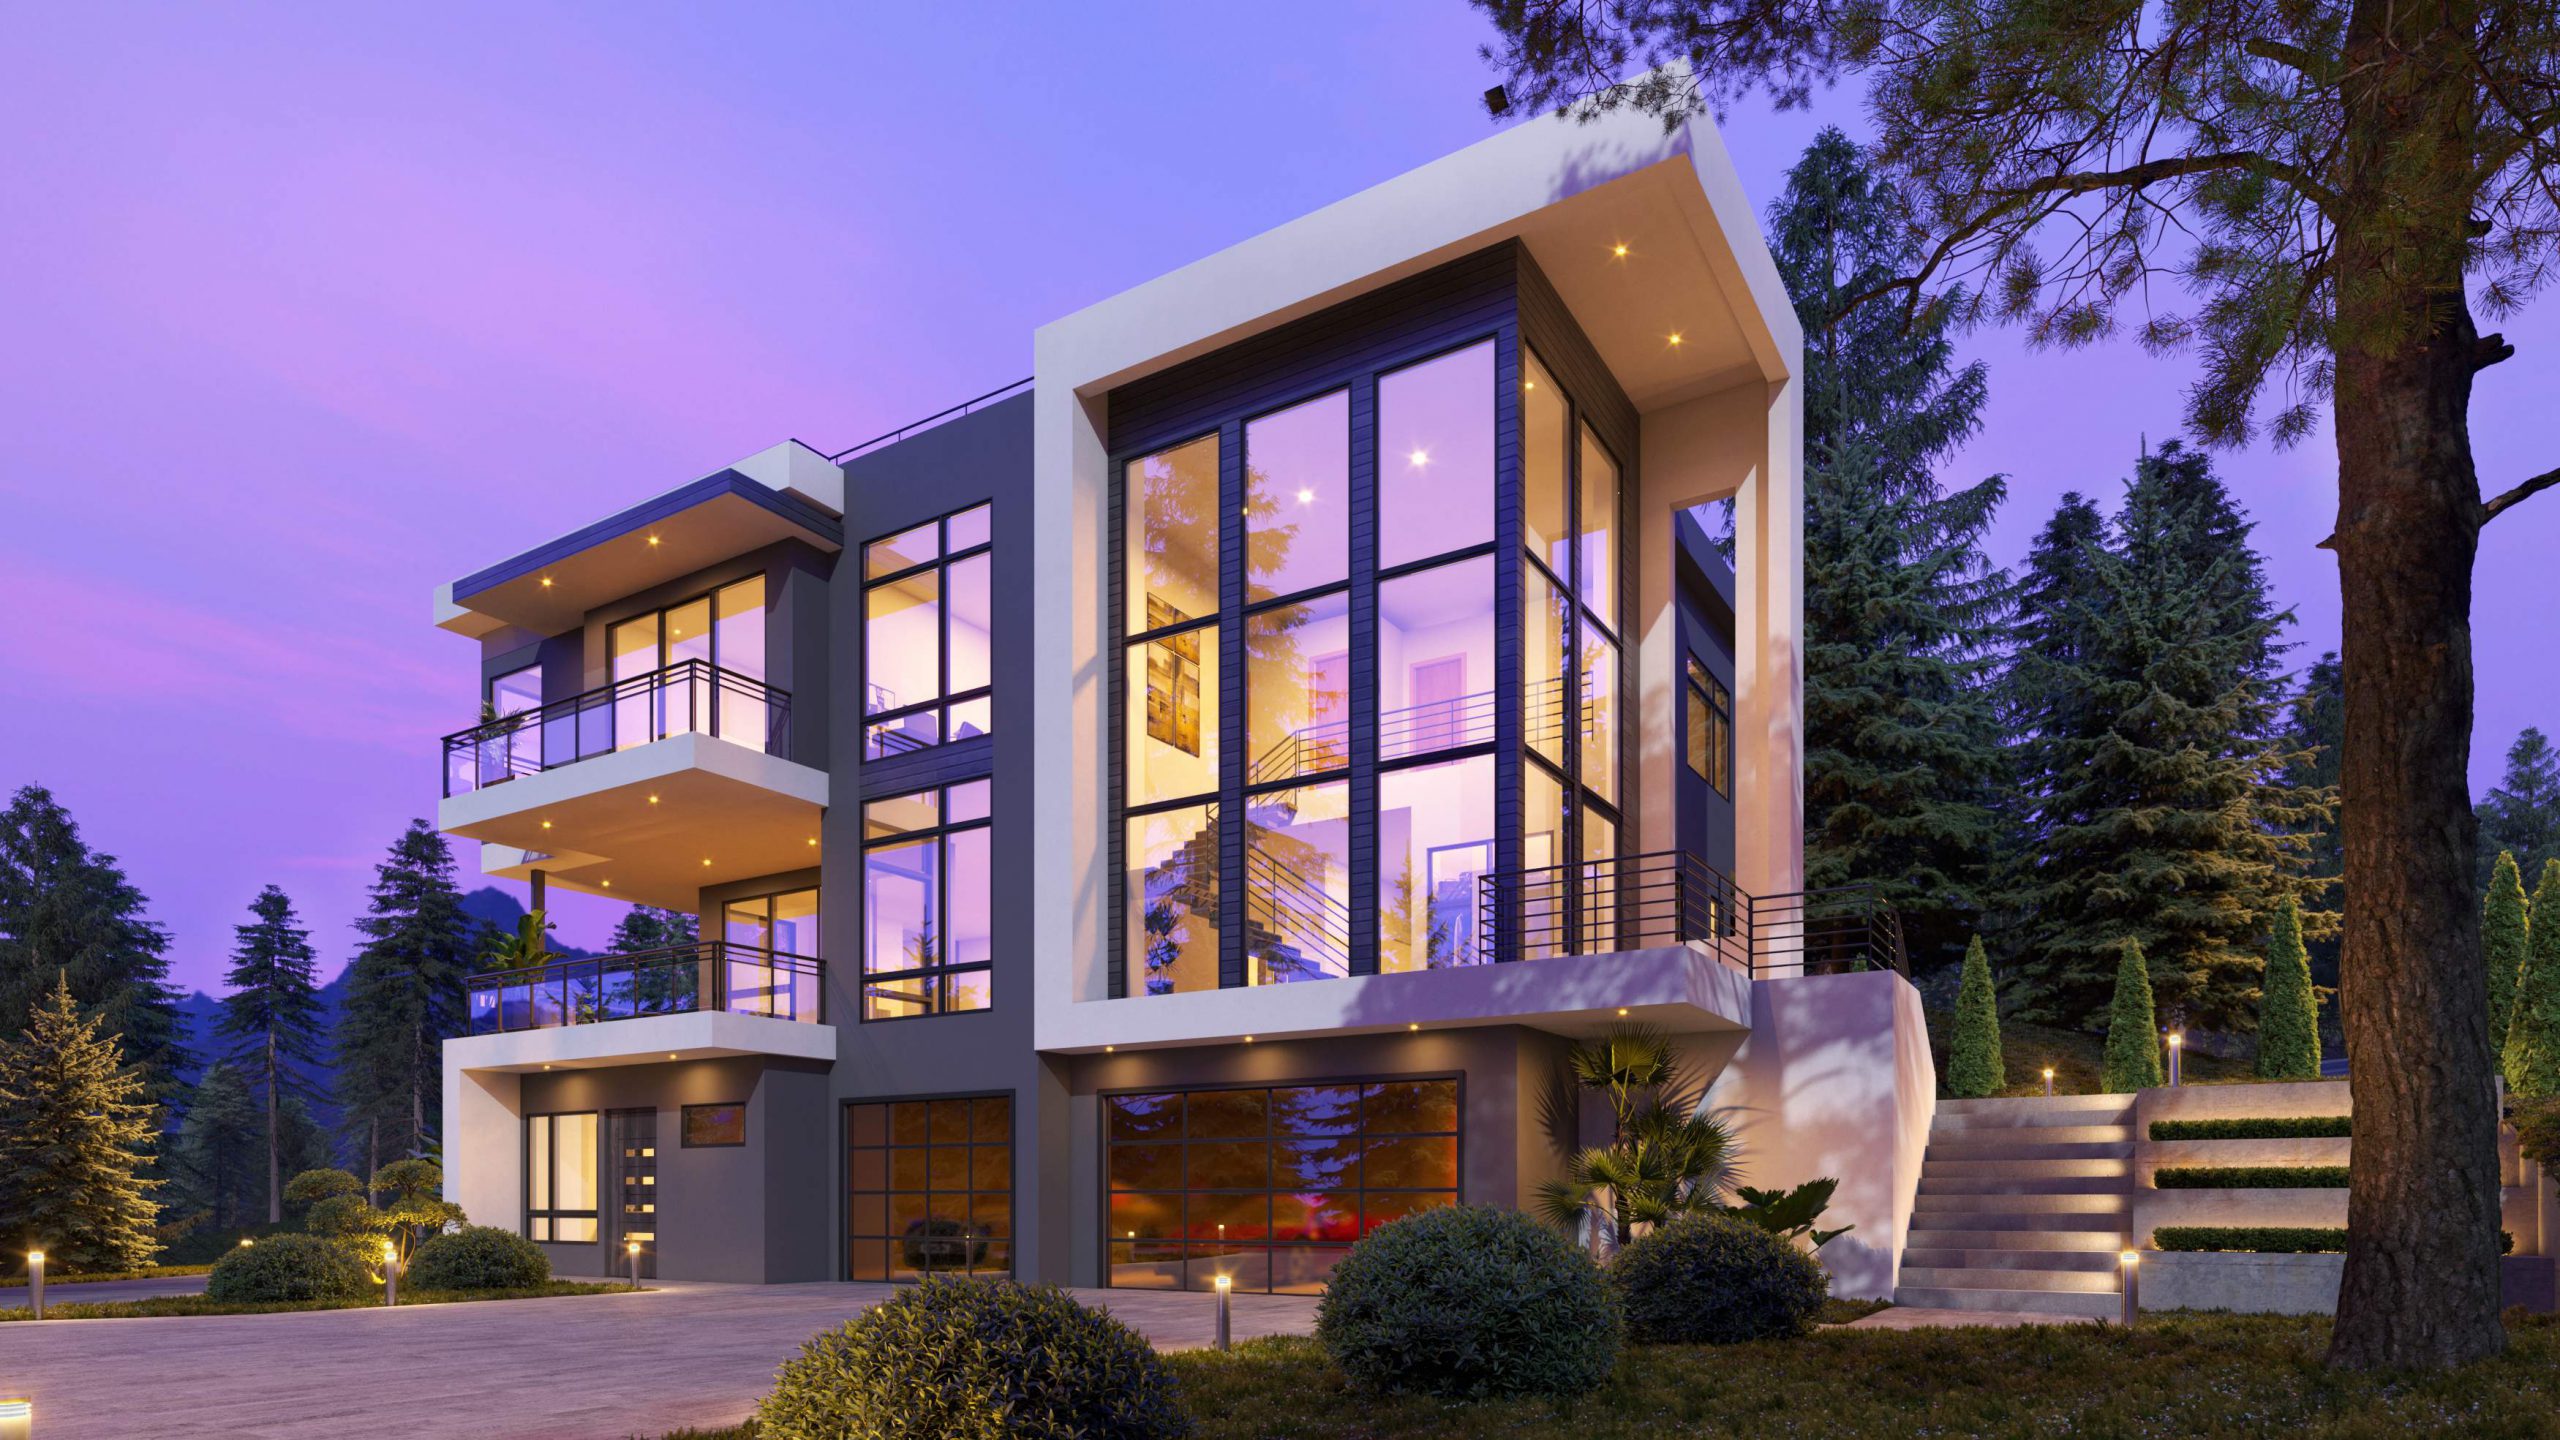 Aspiring homeowners are drawn to the dramatic style of modern contemporary architecture